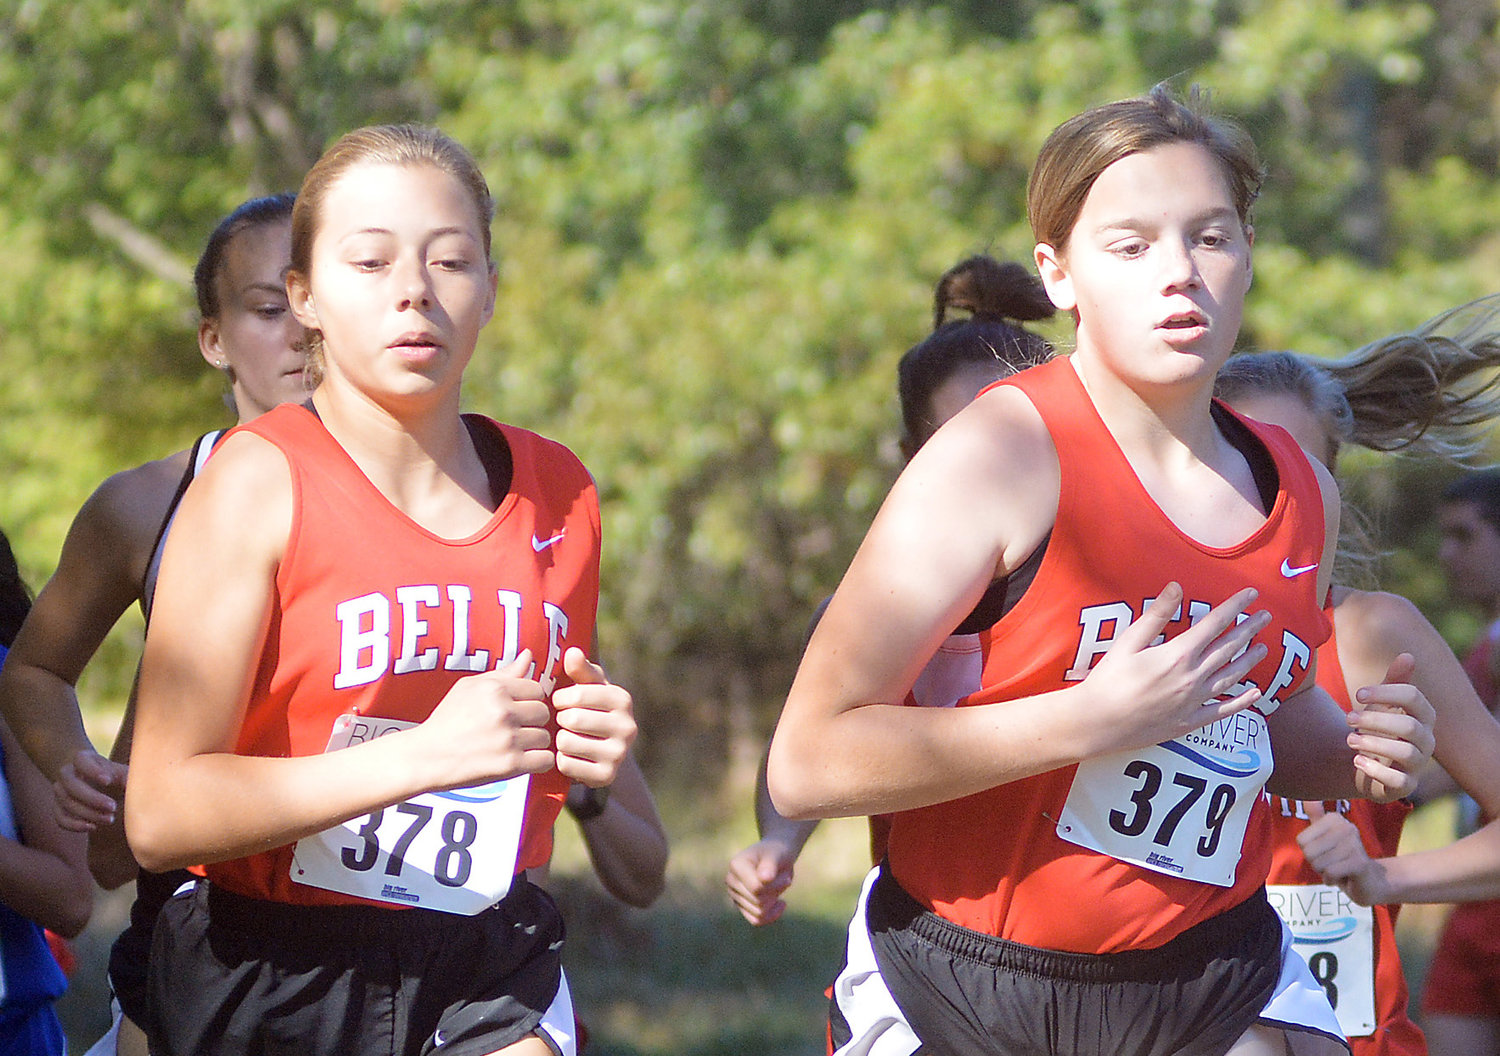 Natalie Gehlert and Tajel McDaniel (from left) set the early pace for Belle in the varsity girls race at Friday’s GVC meet in Steelville.